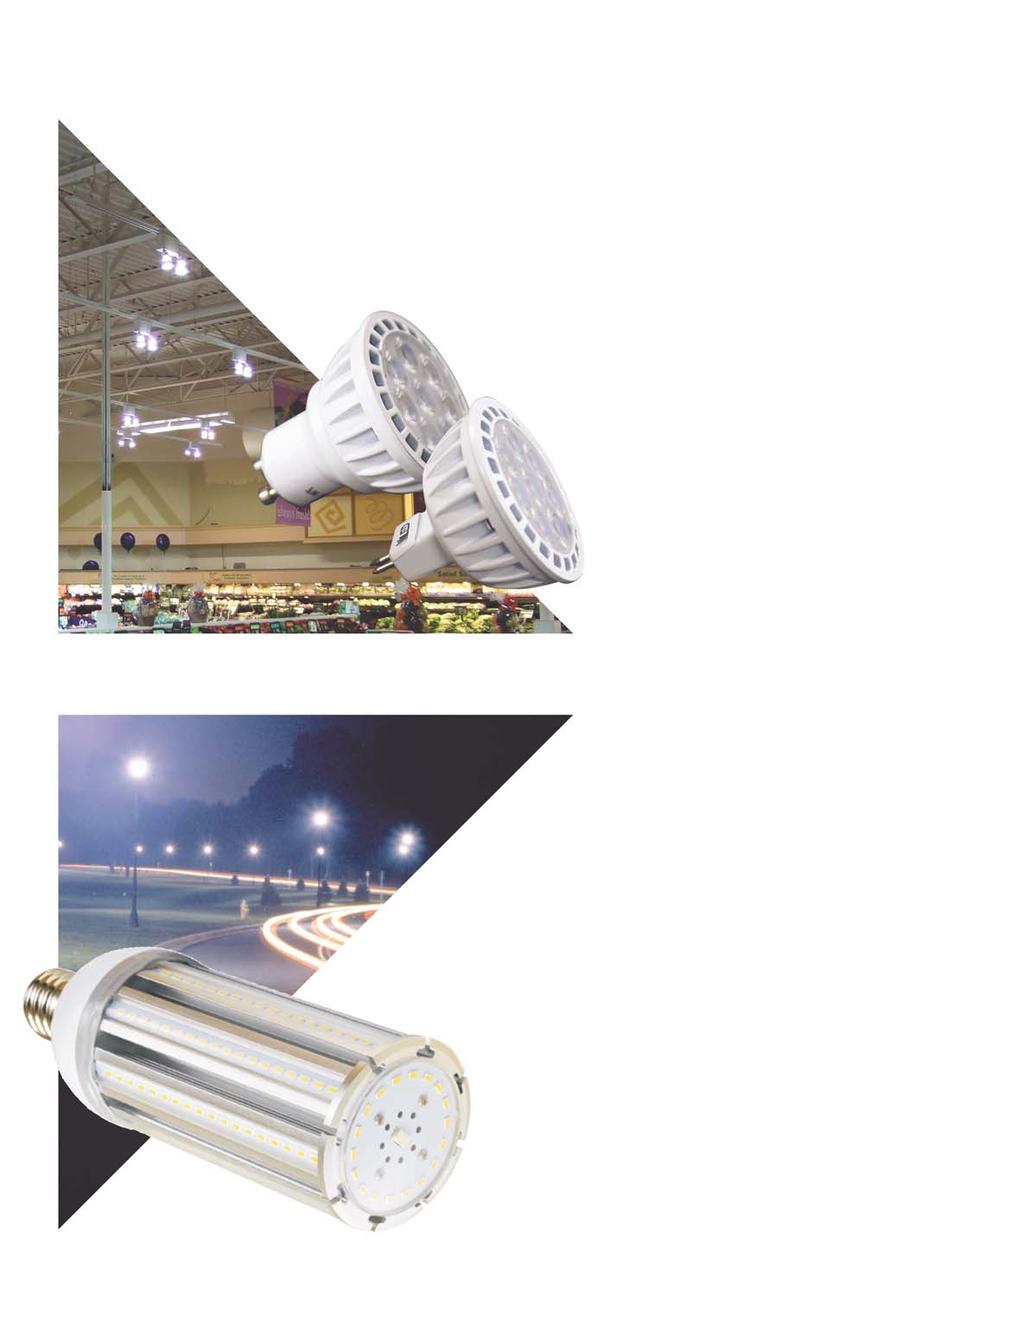 Venture LED lamps LED MR16 LAMPS Venture Lighting s LED MR16 lamps use one tenth of the energy and offer up to 8 times the life compared to standard halogen lamps.